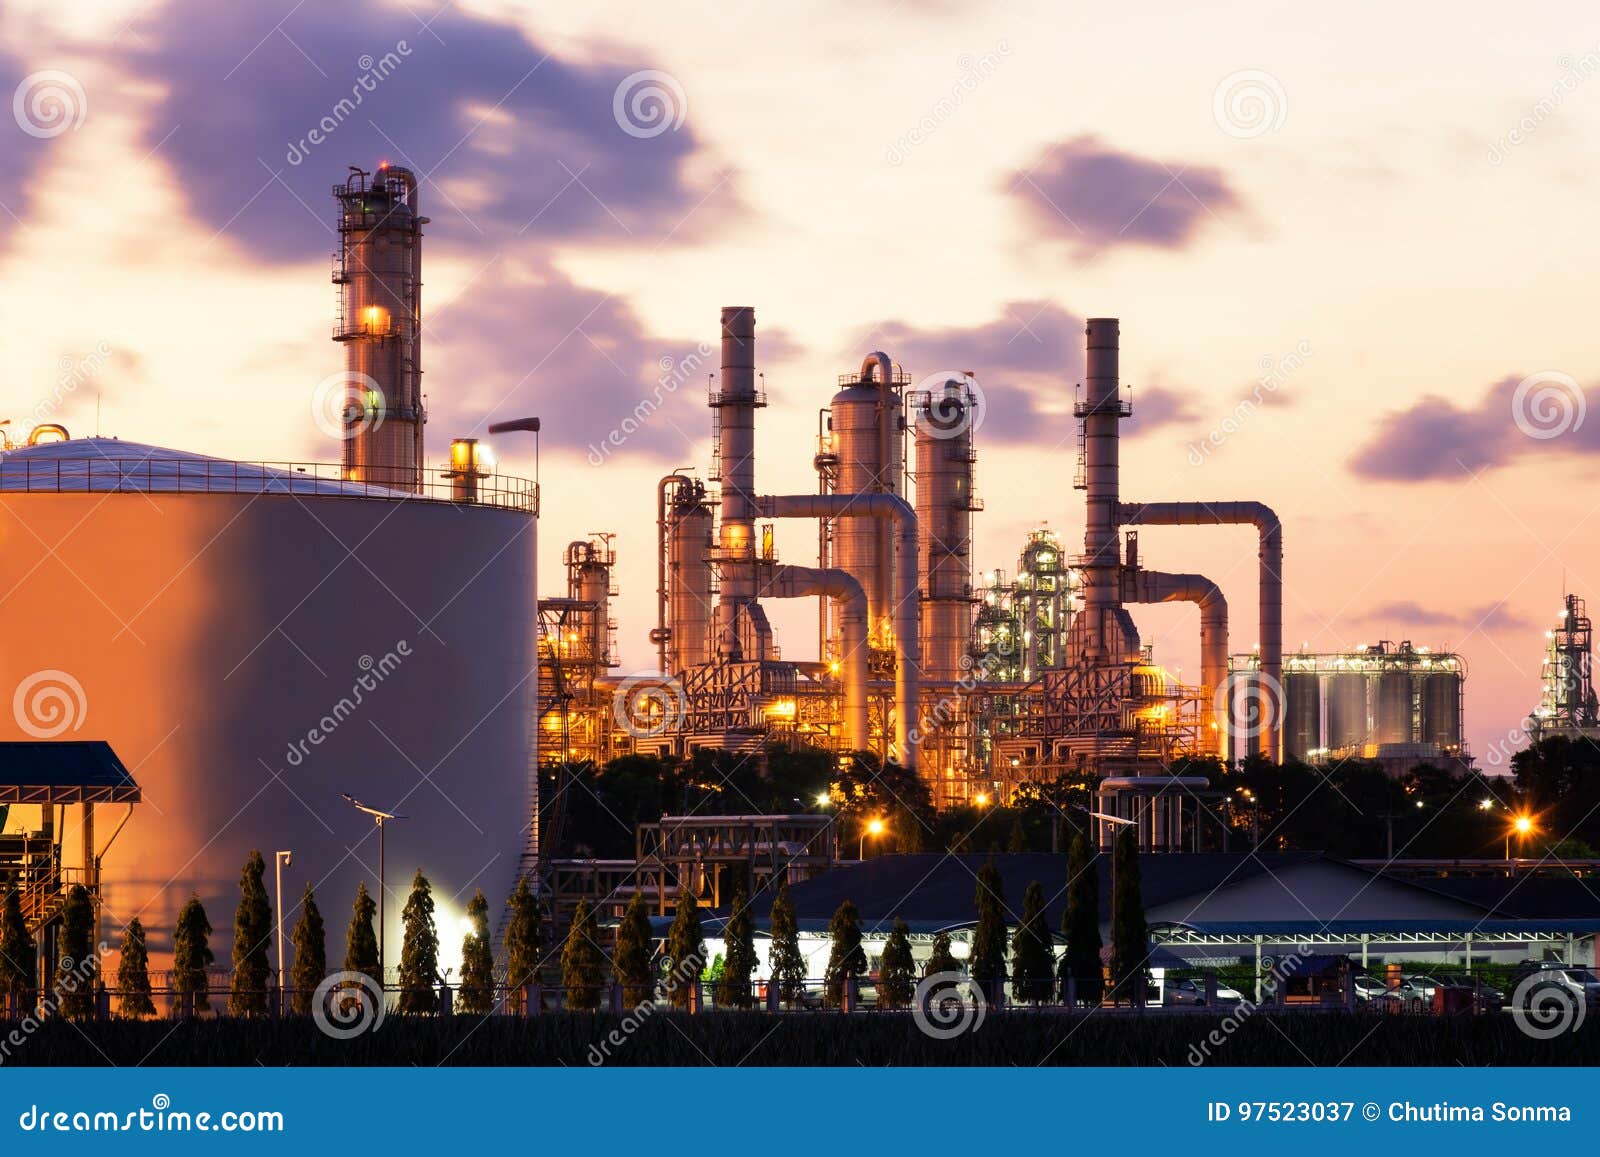 oil refinery factory at twilight, petrochemical plant, petroleum, chemical industry